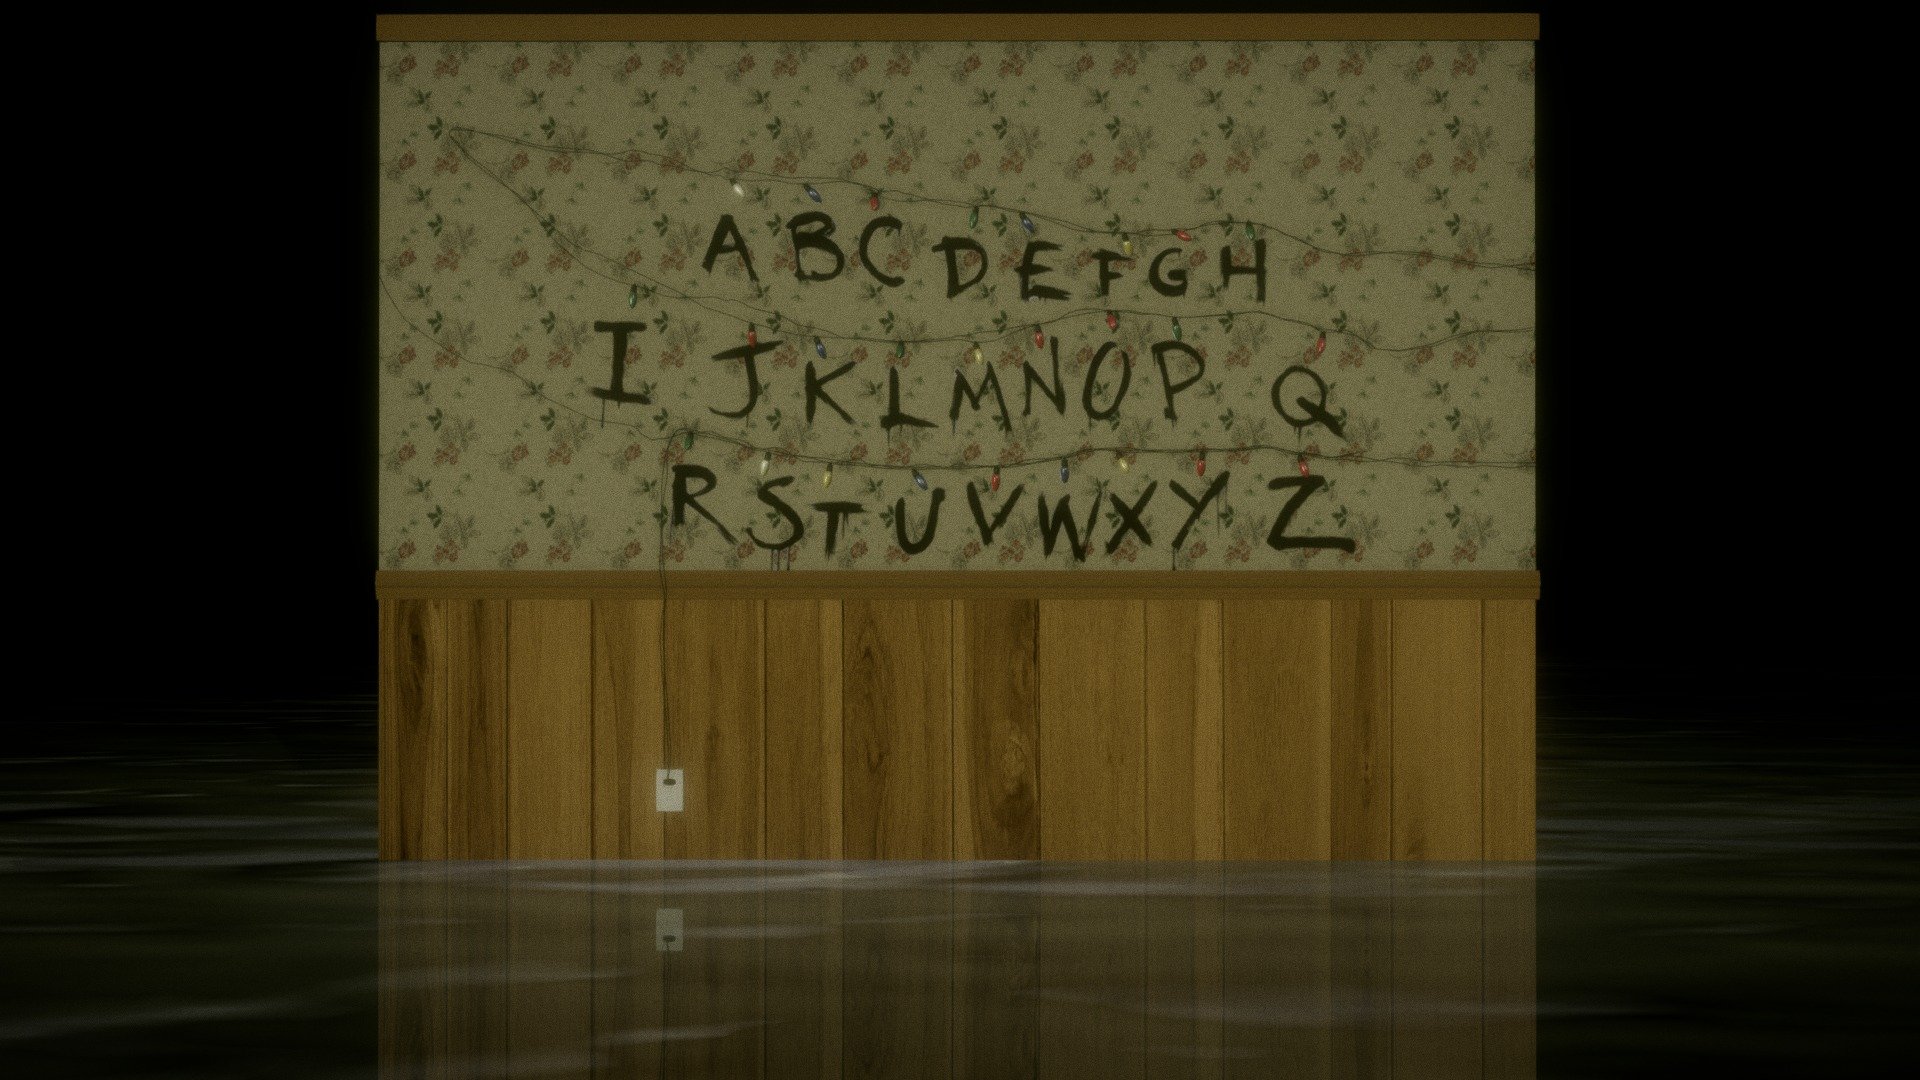 The famous Byers wall with the lights from the show Stranger Things. I thought it would be nice to use it in for a scene, then it occured to me that Christmas is just around the corner, so I threw in a seasonal message in the animation! I have to thank my dearest @twitte_king♡ for helping me make the animation idea work out, he came up with this awesome trick for his &ldquo;Neon light test